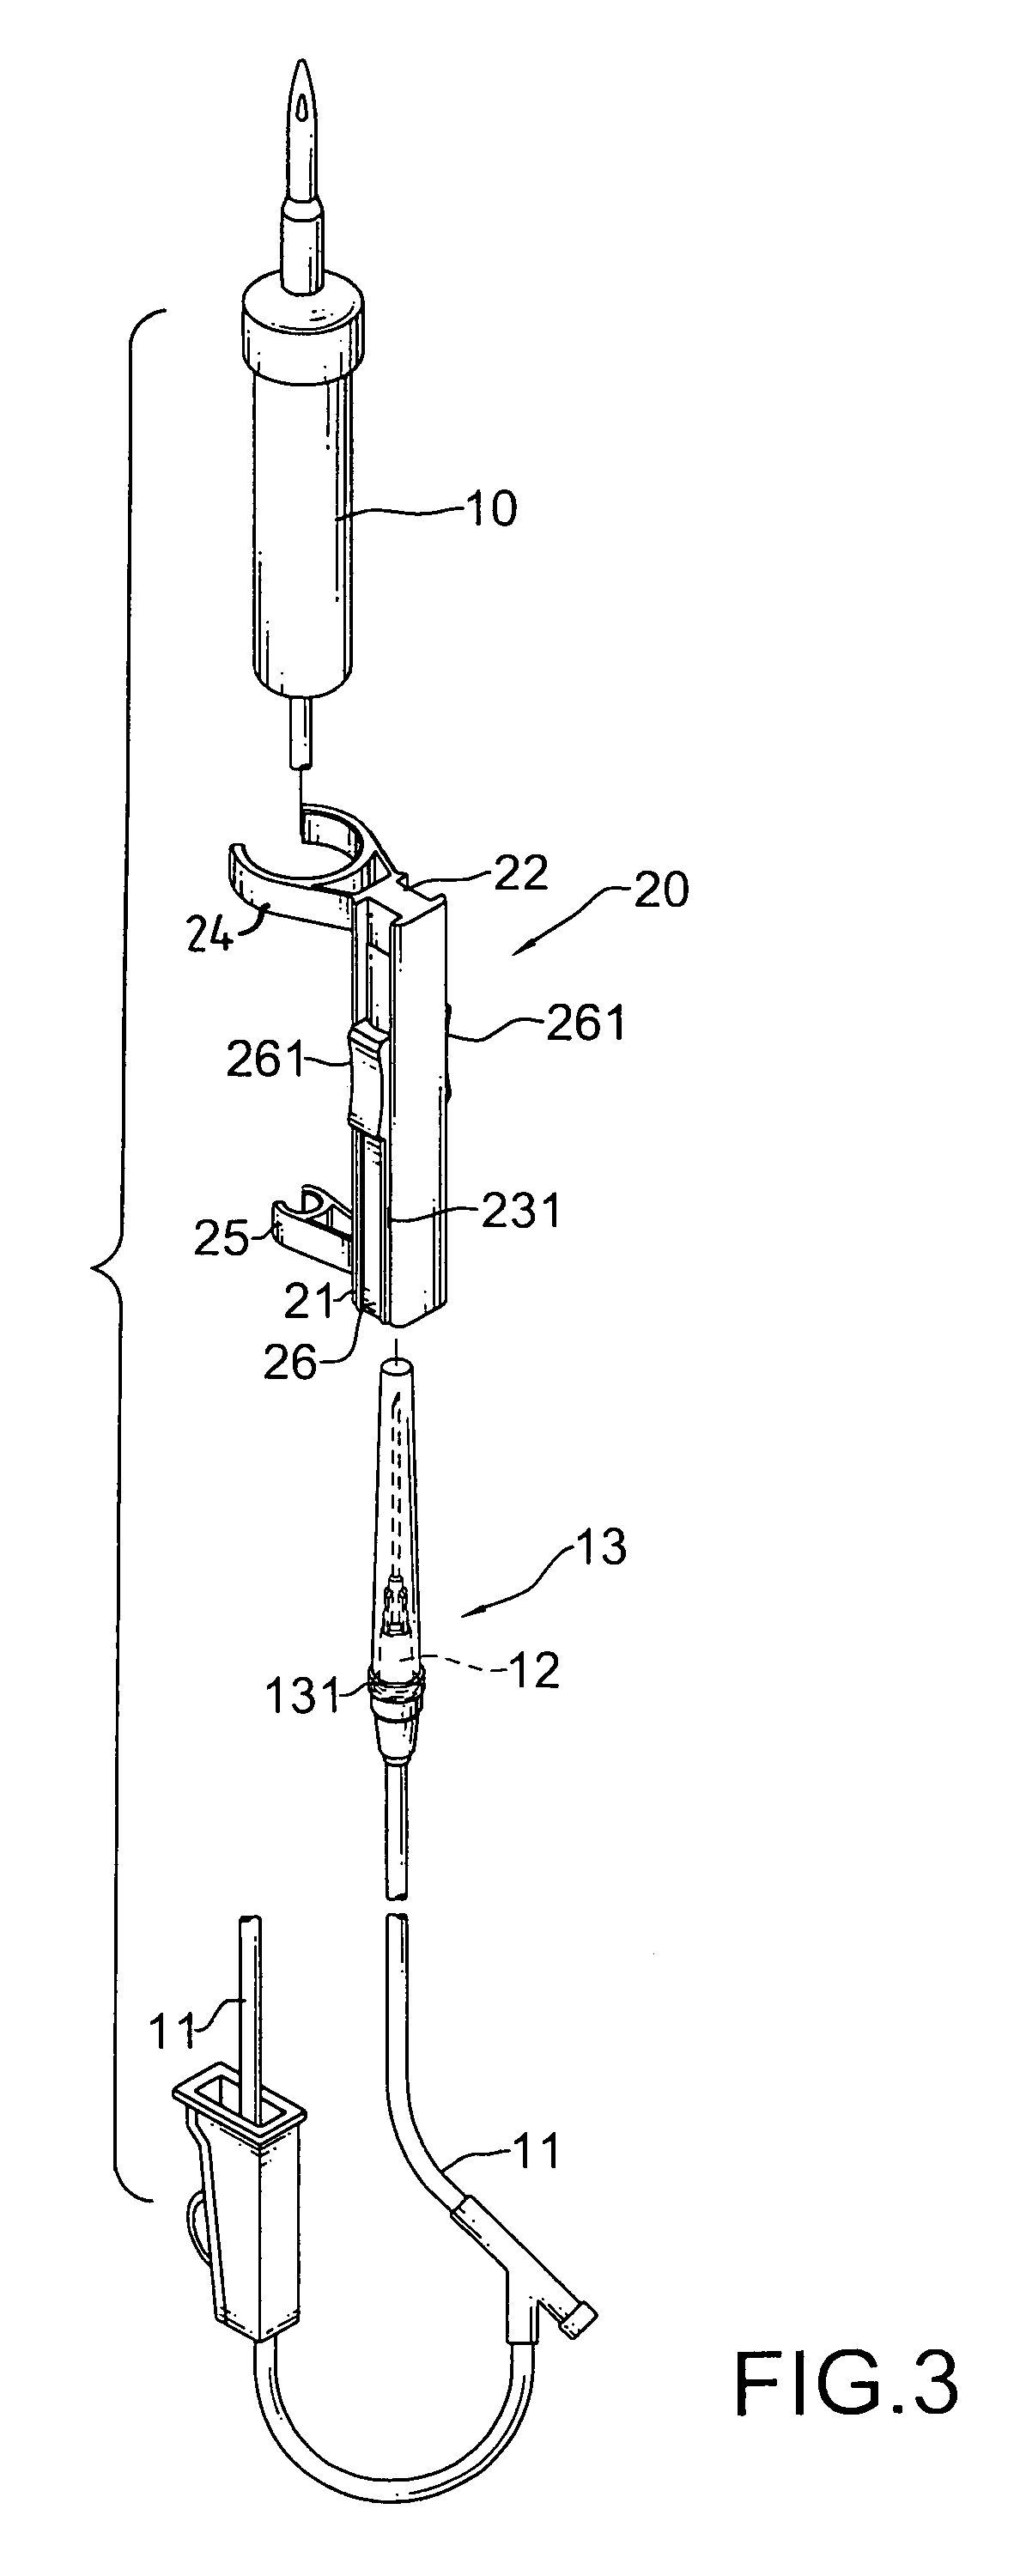 Safety receptacle for a needle of an intravenous drip assembly